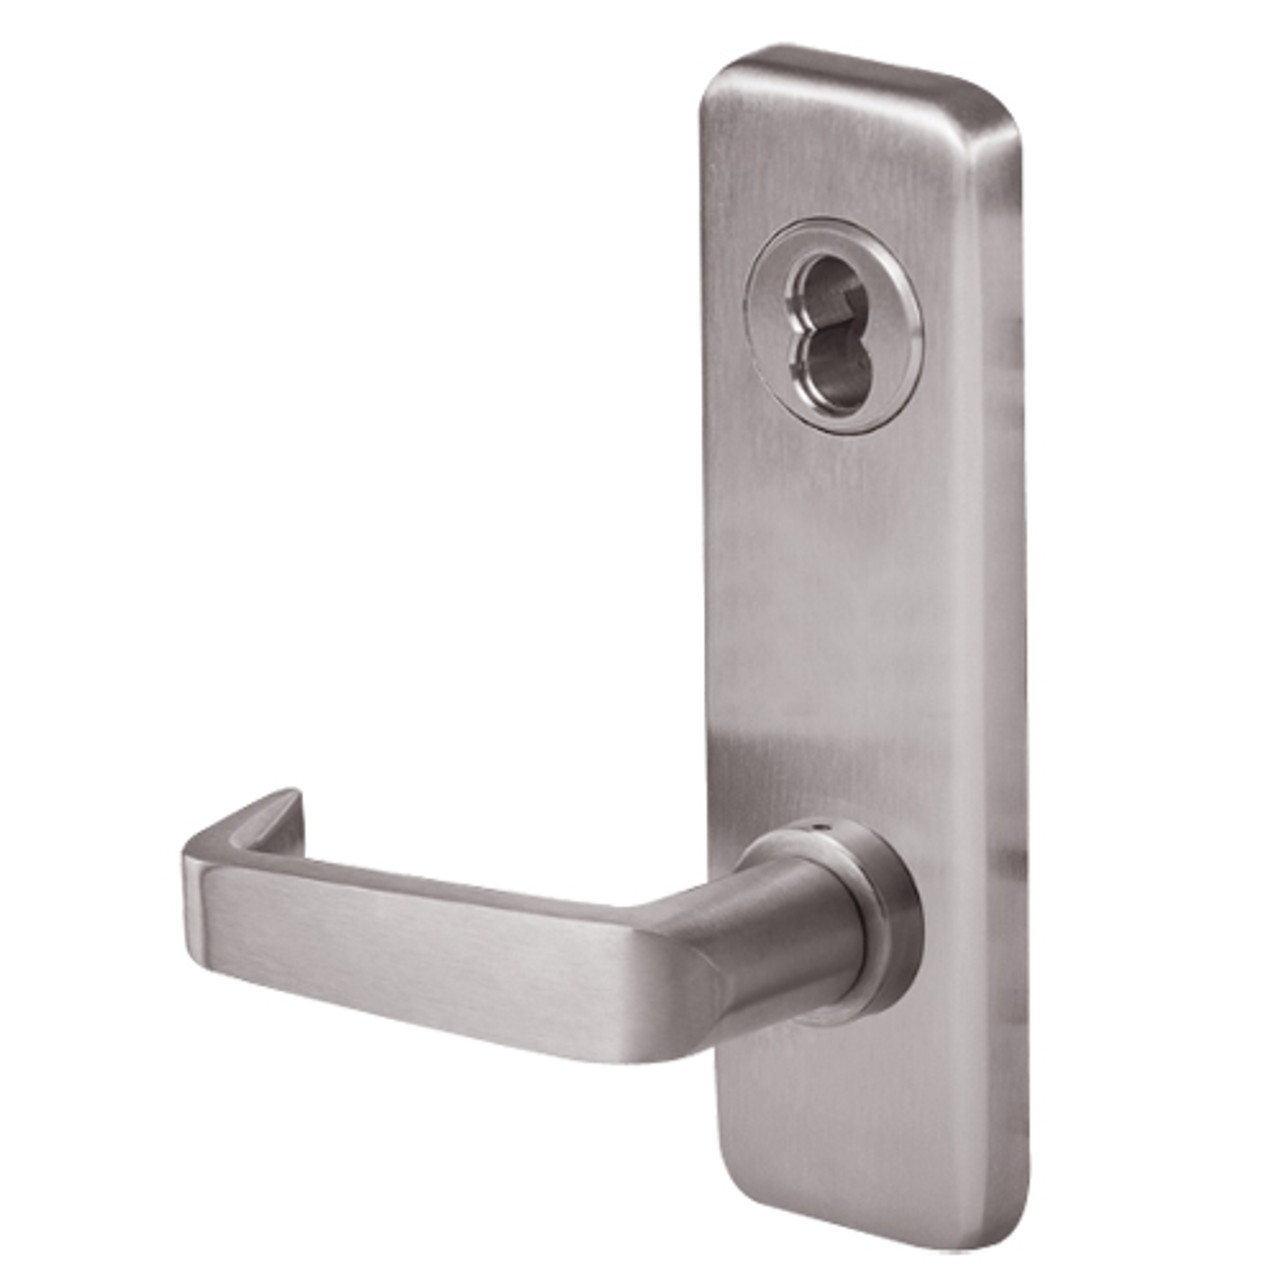 45H7A15J630 Best 40H Series Office Heavy Duty Mortise Lever Lock with Contour with Angle Return Style in Satin Stainless Steel